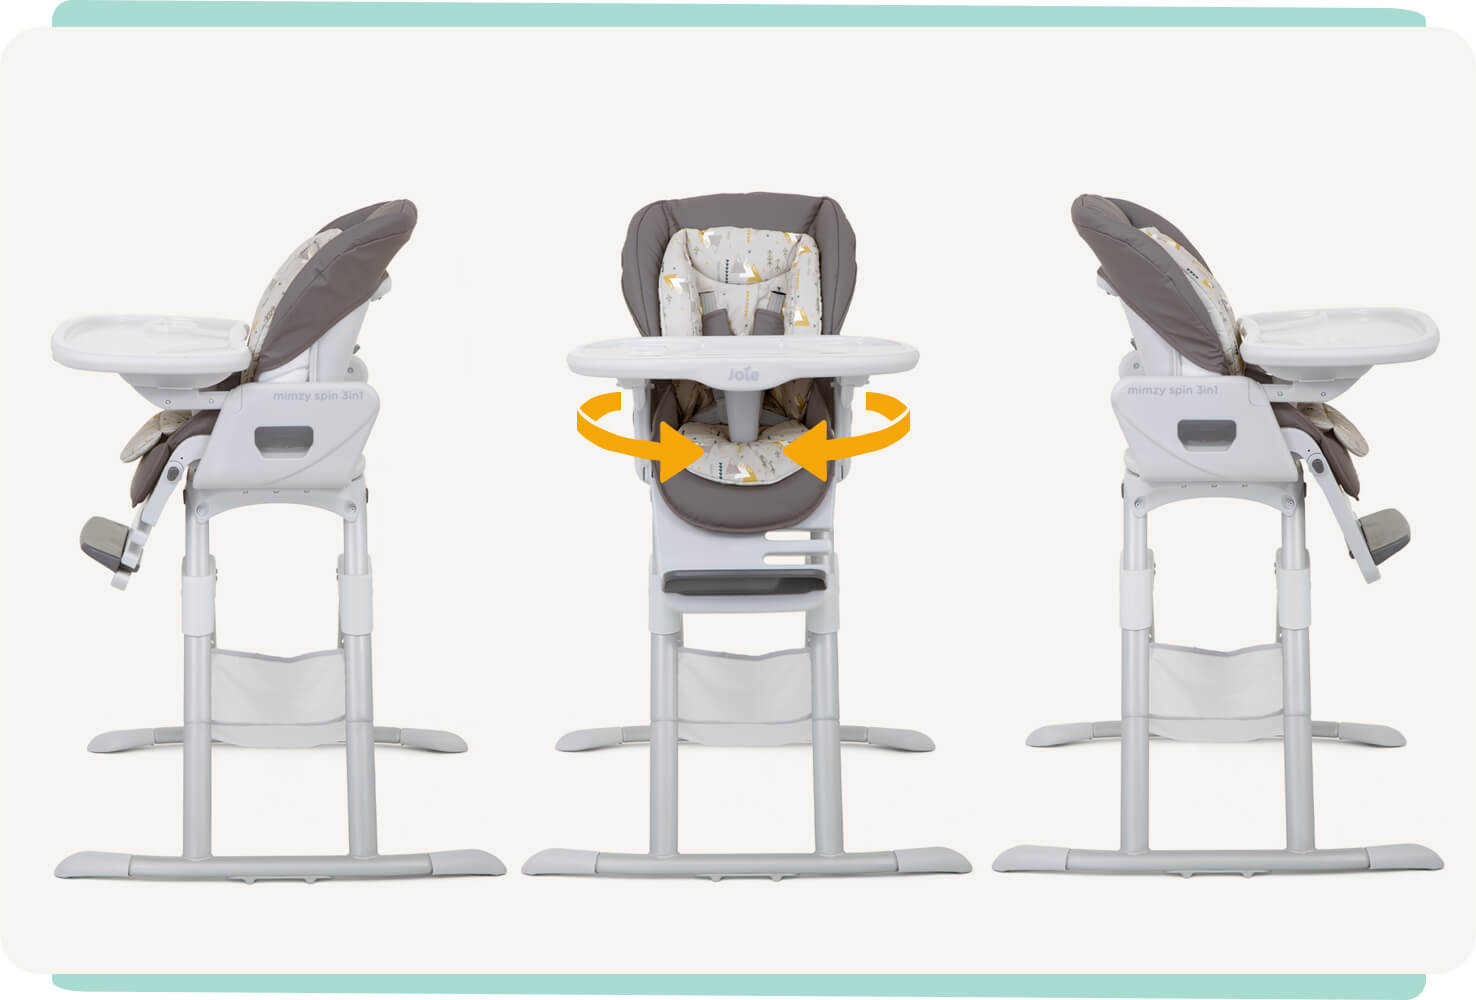  Three Joie mimzy Spin 3in1 highchairs. The two on the ends are side views facing out and the middle highchair is a front view overlaid with curved arrows coming around from the back on each side to indicate the seat spins on the base.